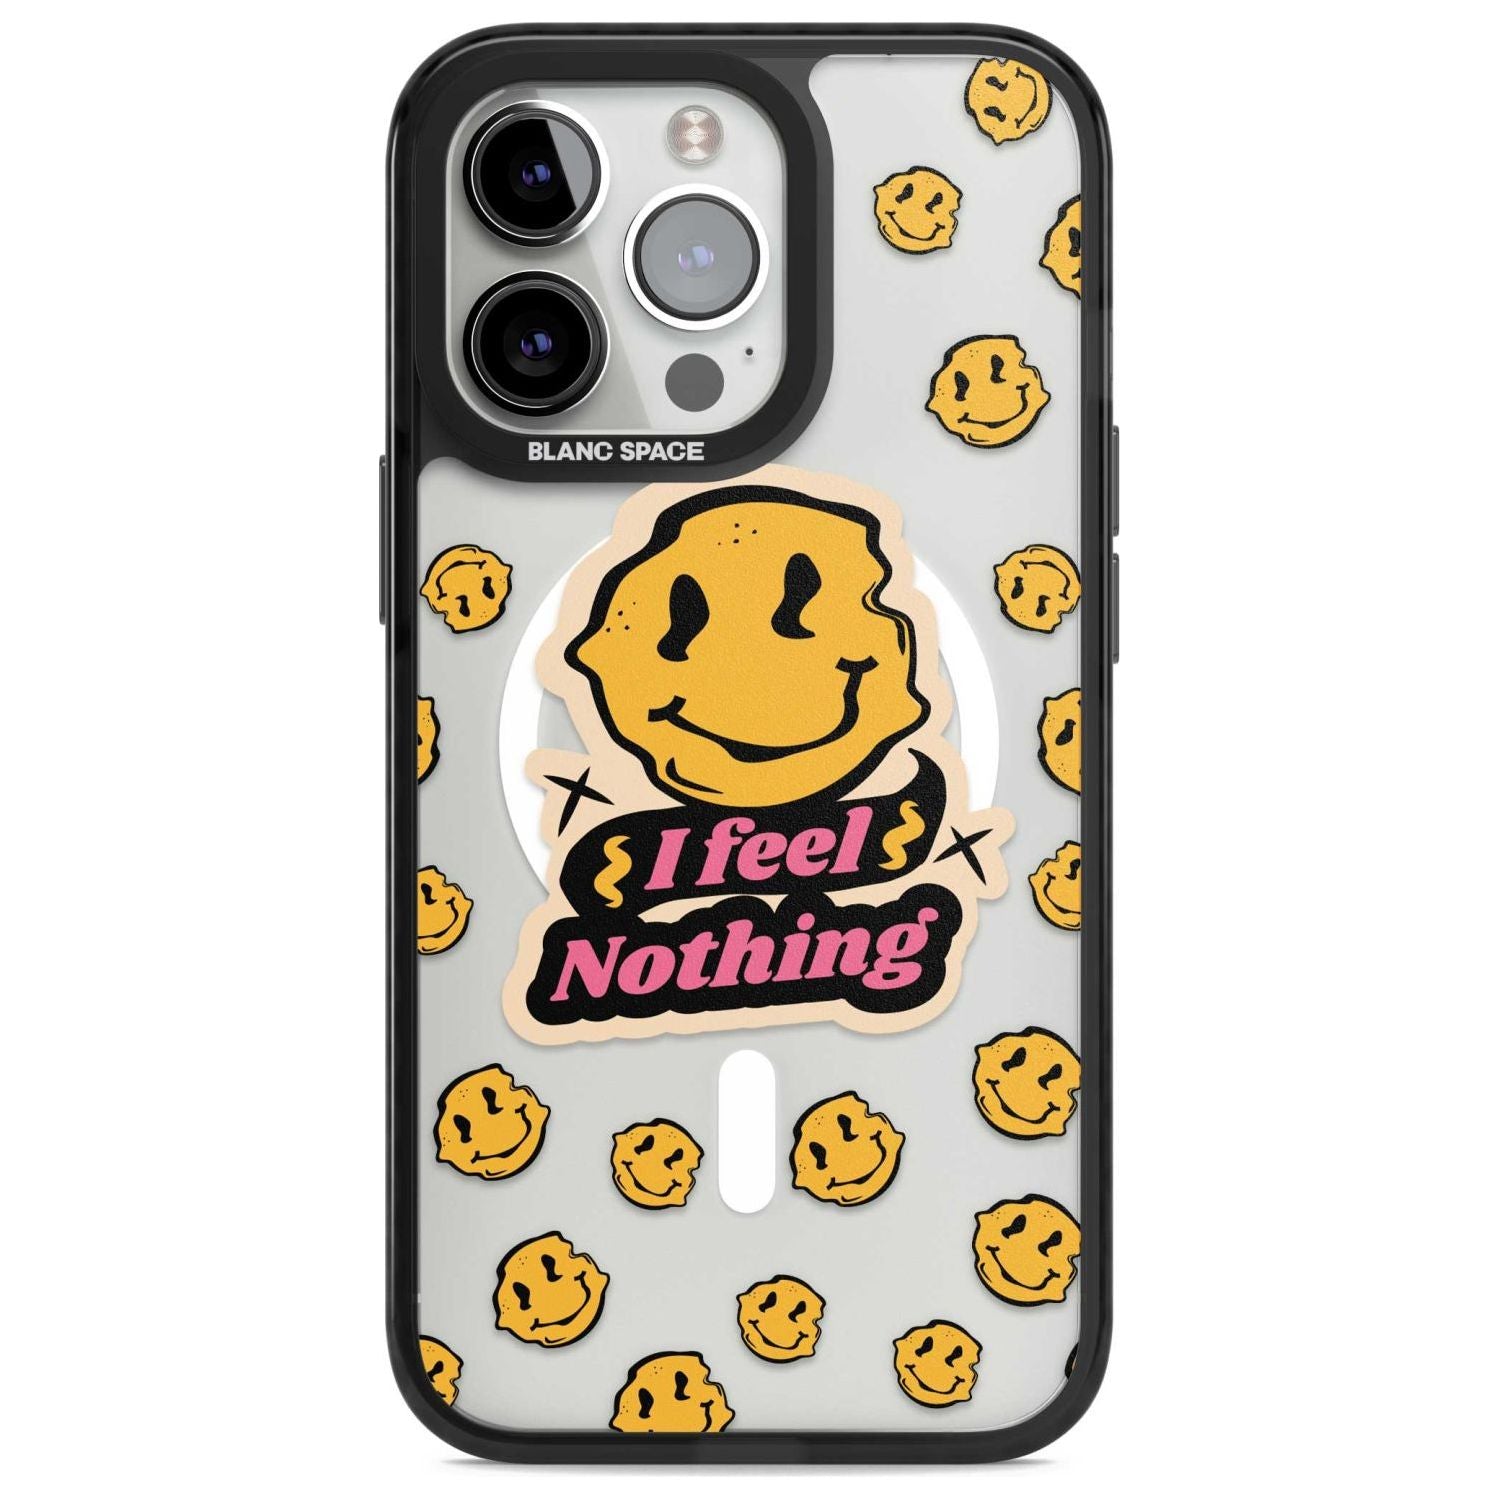 I feel nothing (Clear) Phone Case iPhone 15 Pro Max / Magsafe Black Impact Case,iPhone 15 Pro / Magsafe Black Impact Case,iPhone 14 Pro Max / Magsafe Black Impact Case,iPhone 14 Pro / Magsafe Black Impact Case,iPhone 13 Pro / Magsafe Black Impact Case Blanc Space